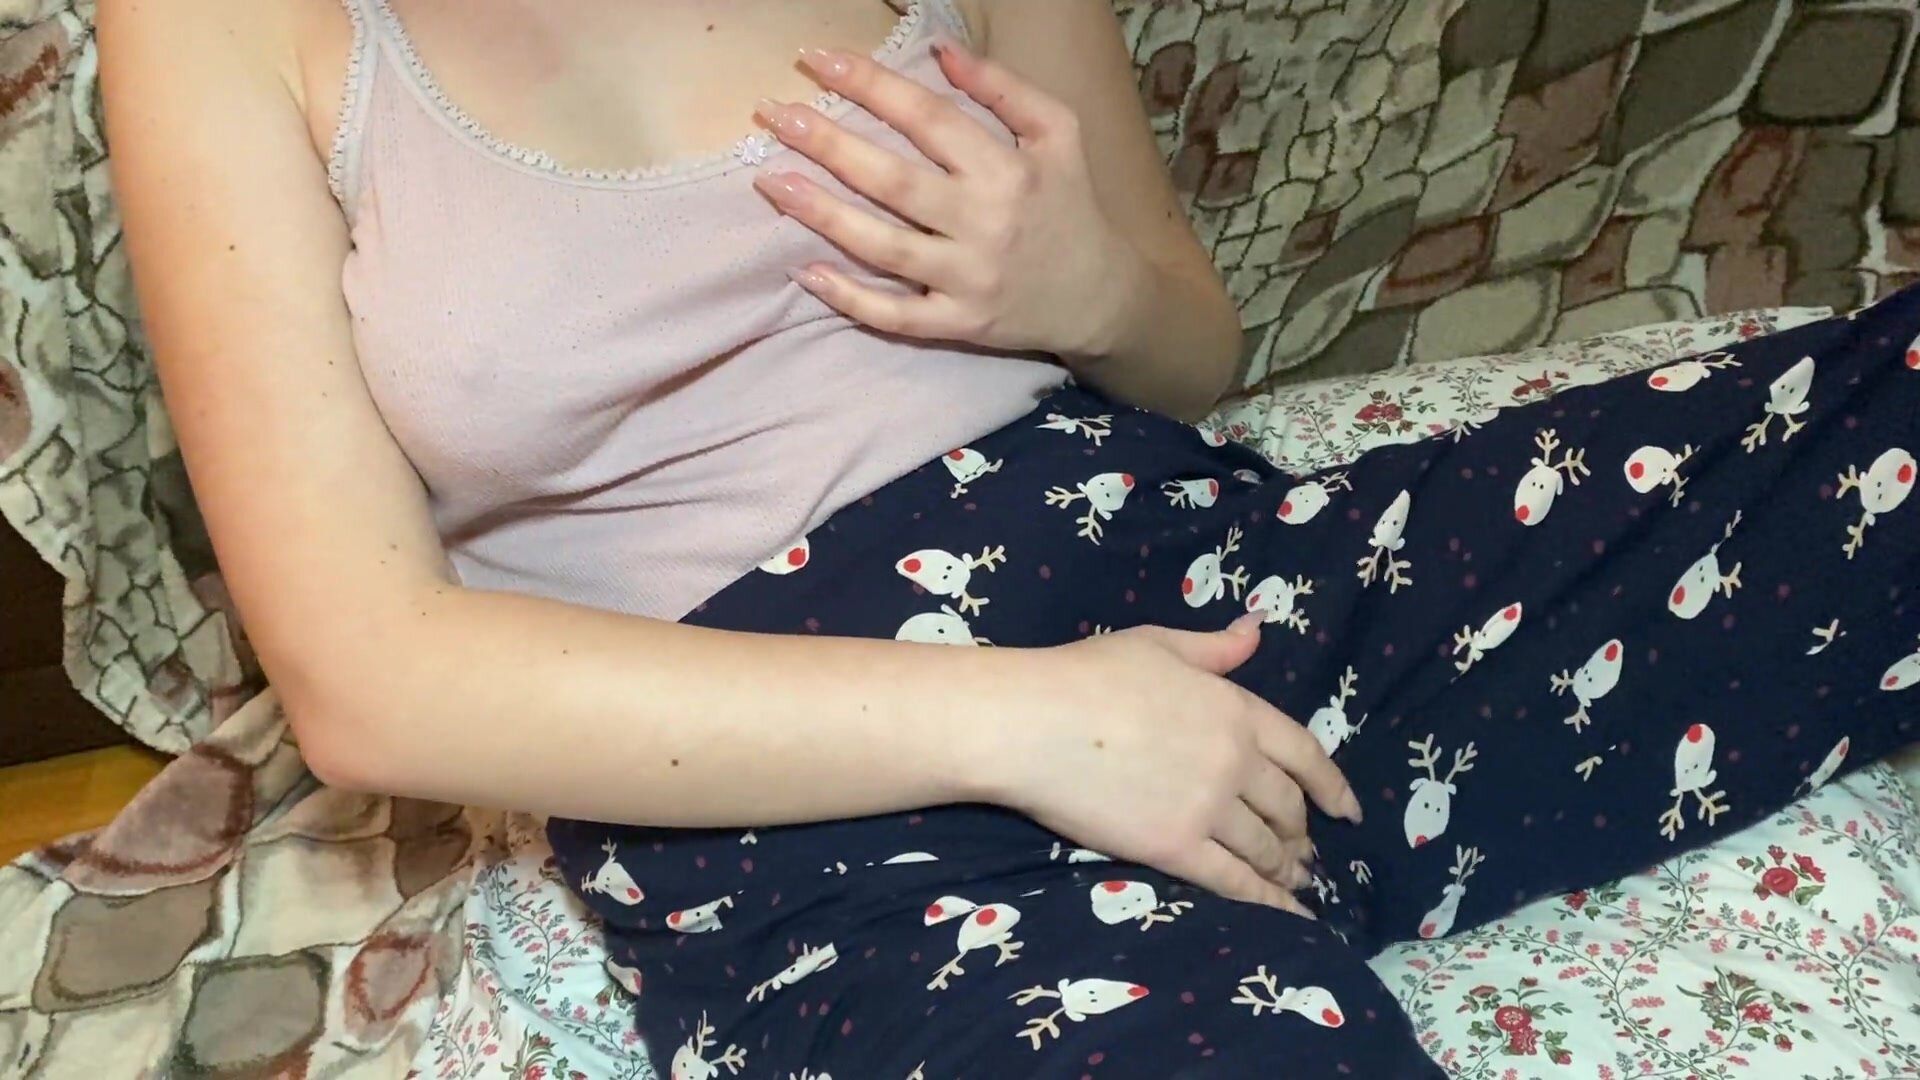 TomaStevi - Trying a new dildo toy and have a moaning orgasm